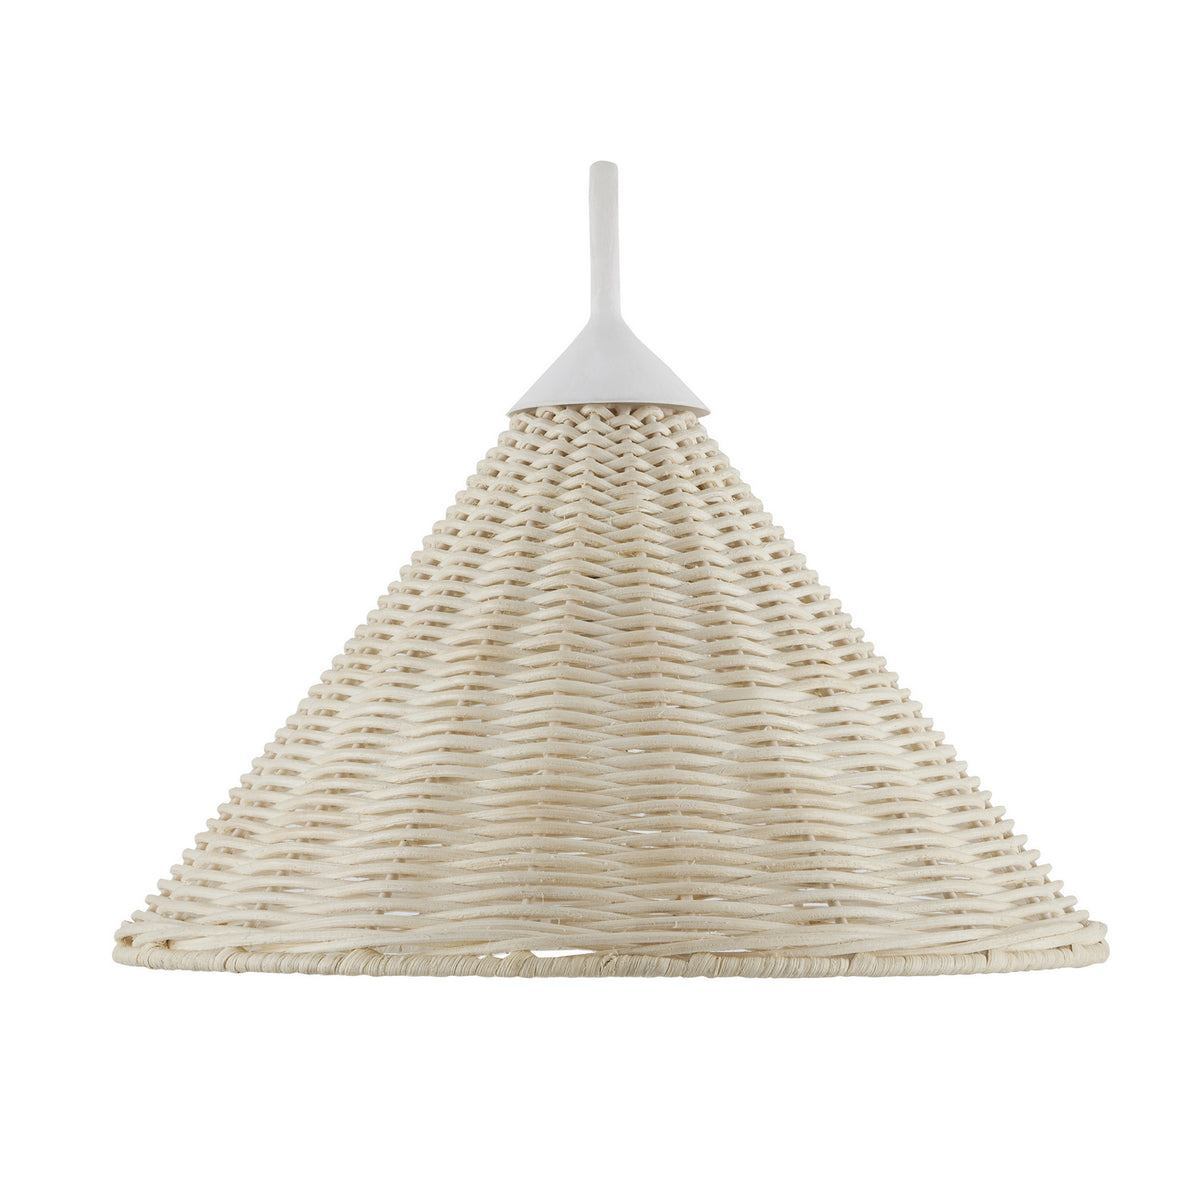 Currey and Company One Light Wall Sconce from the Basket collection in White/Bleached Natural finish